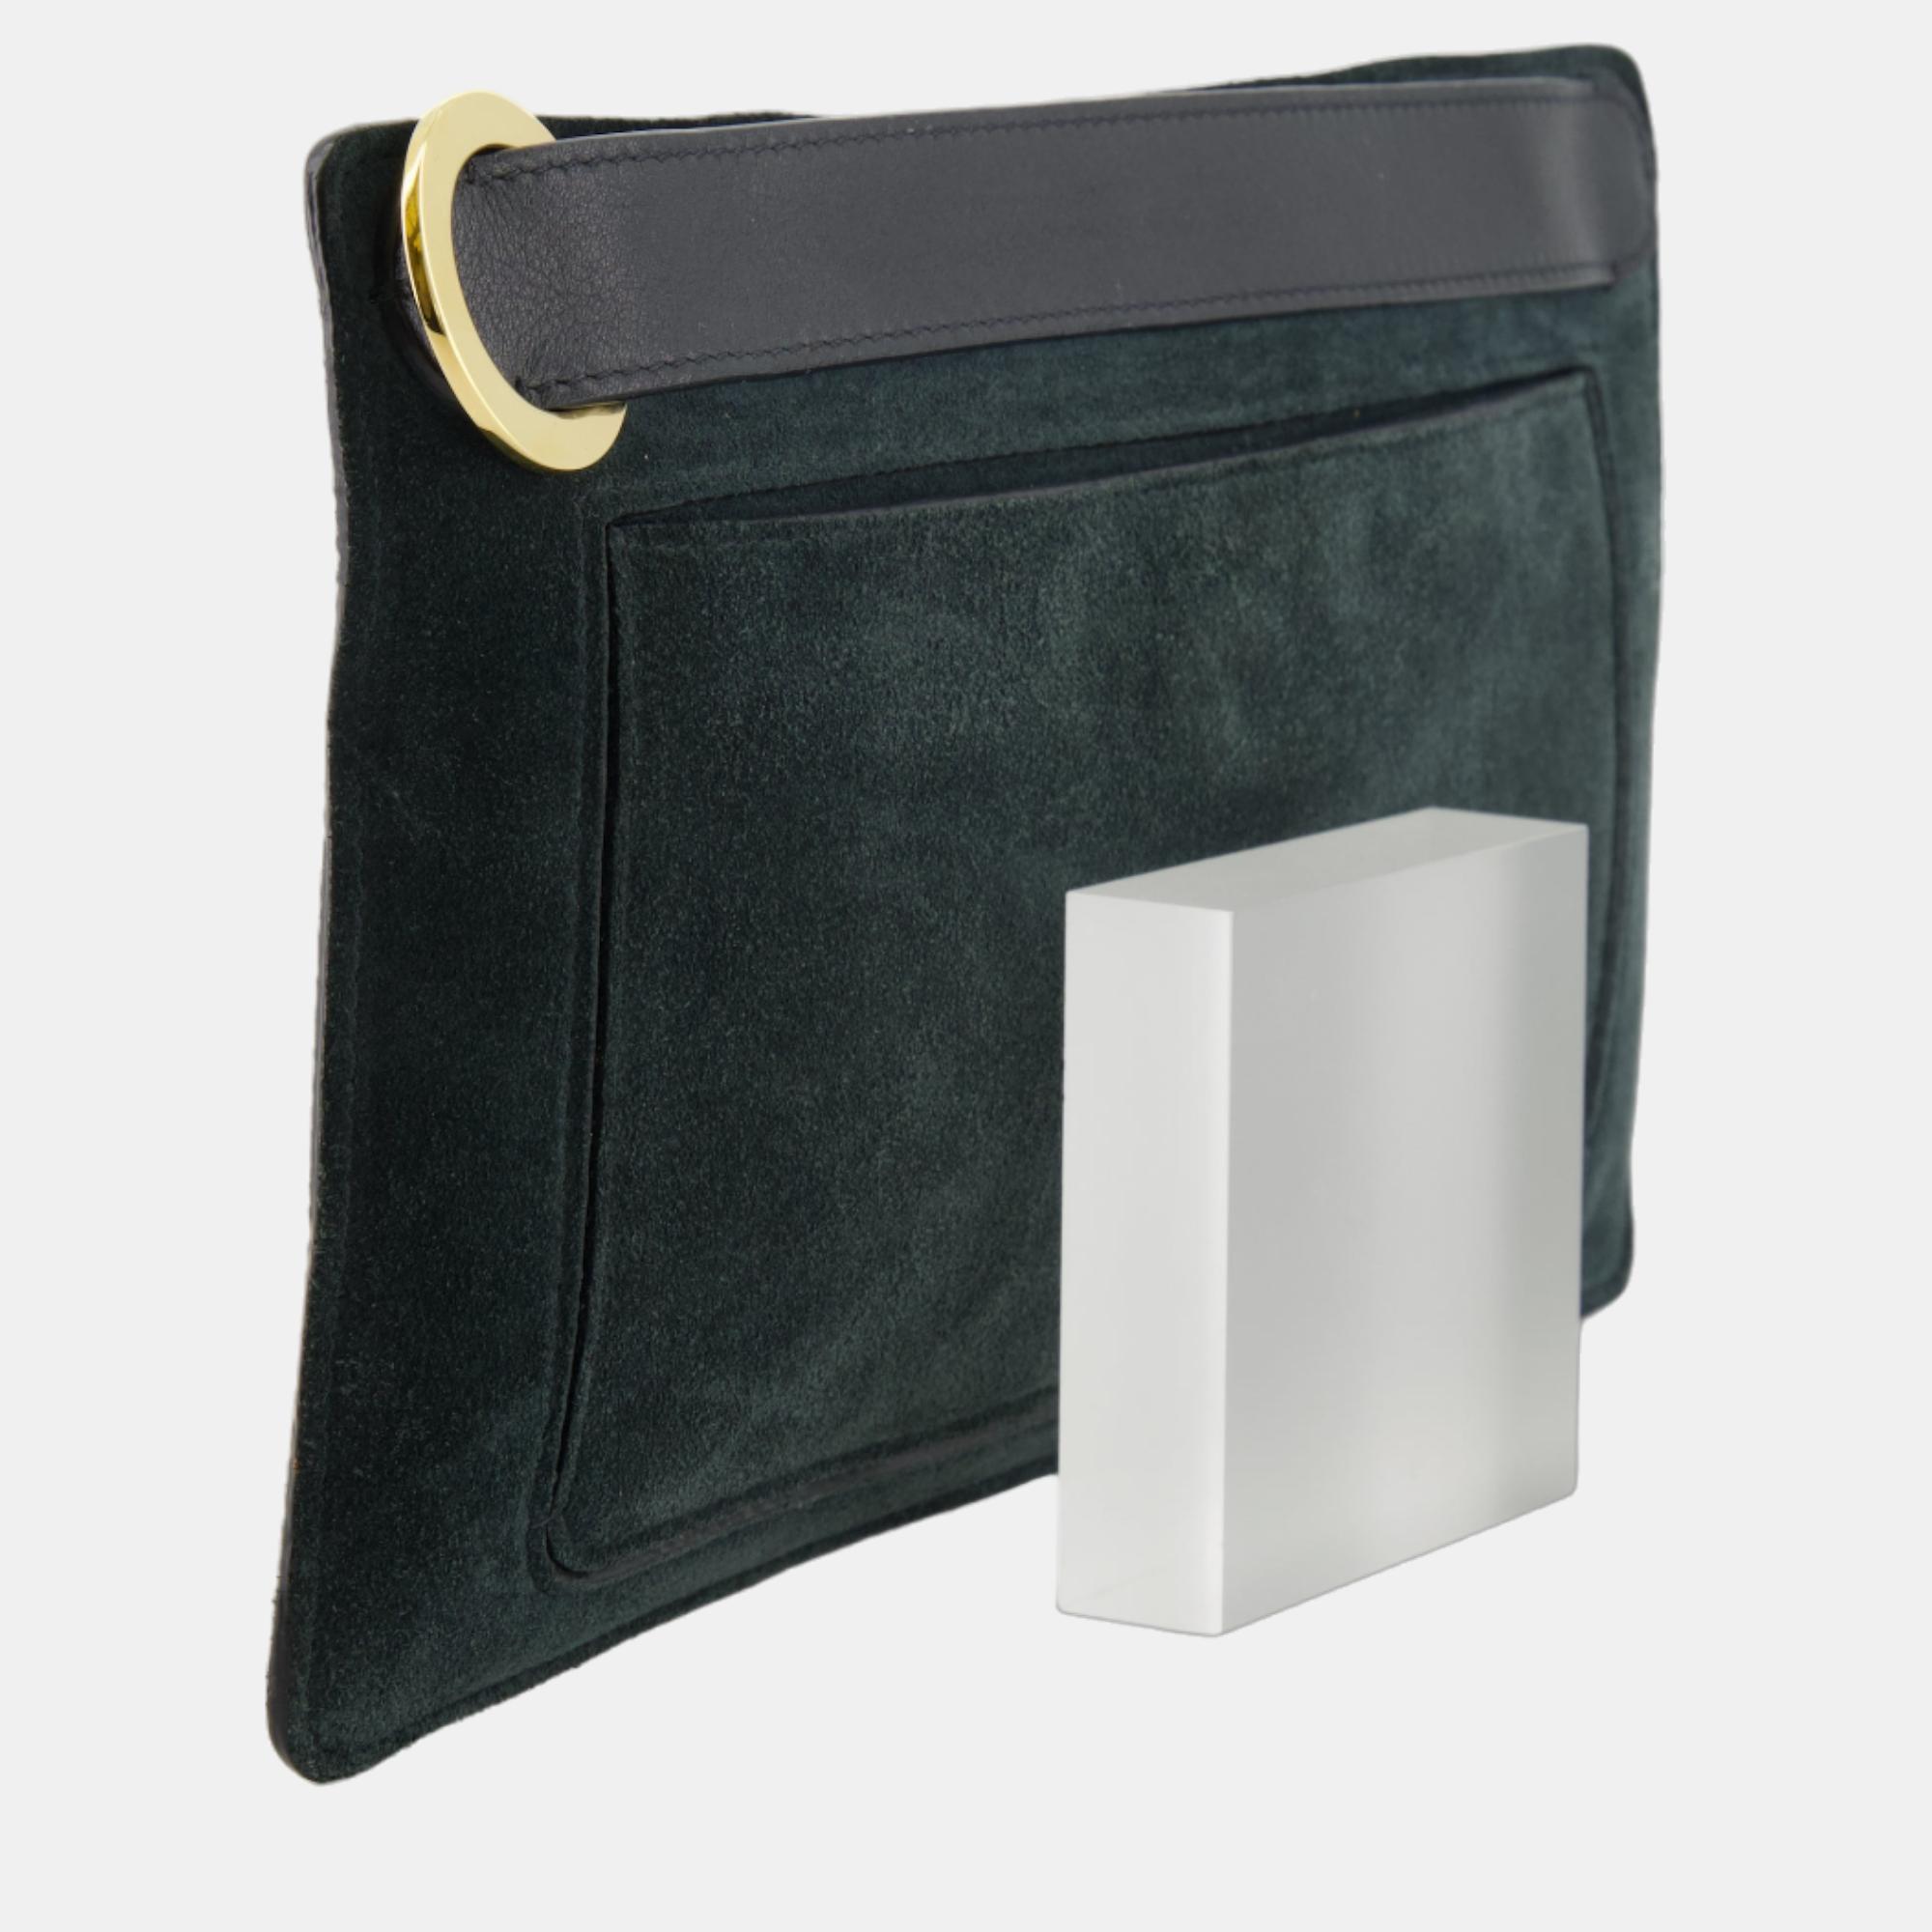 Loro Piana Green Velvet Pouch With Leather Strap And Gold Detailing